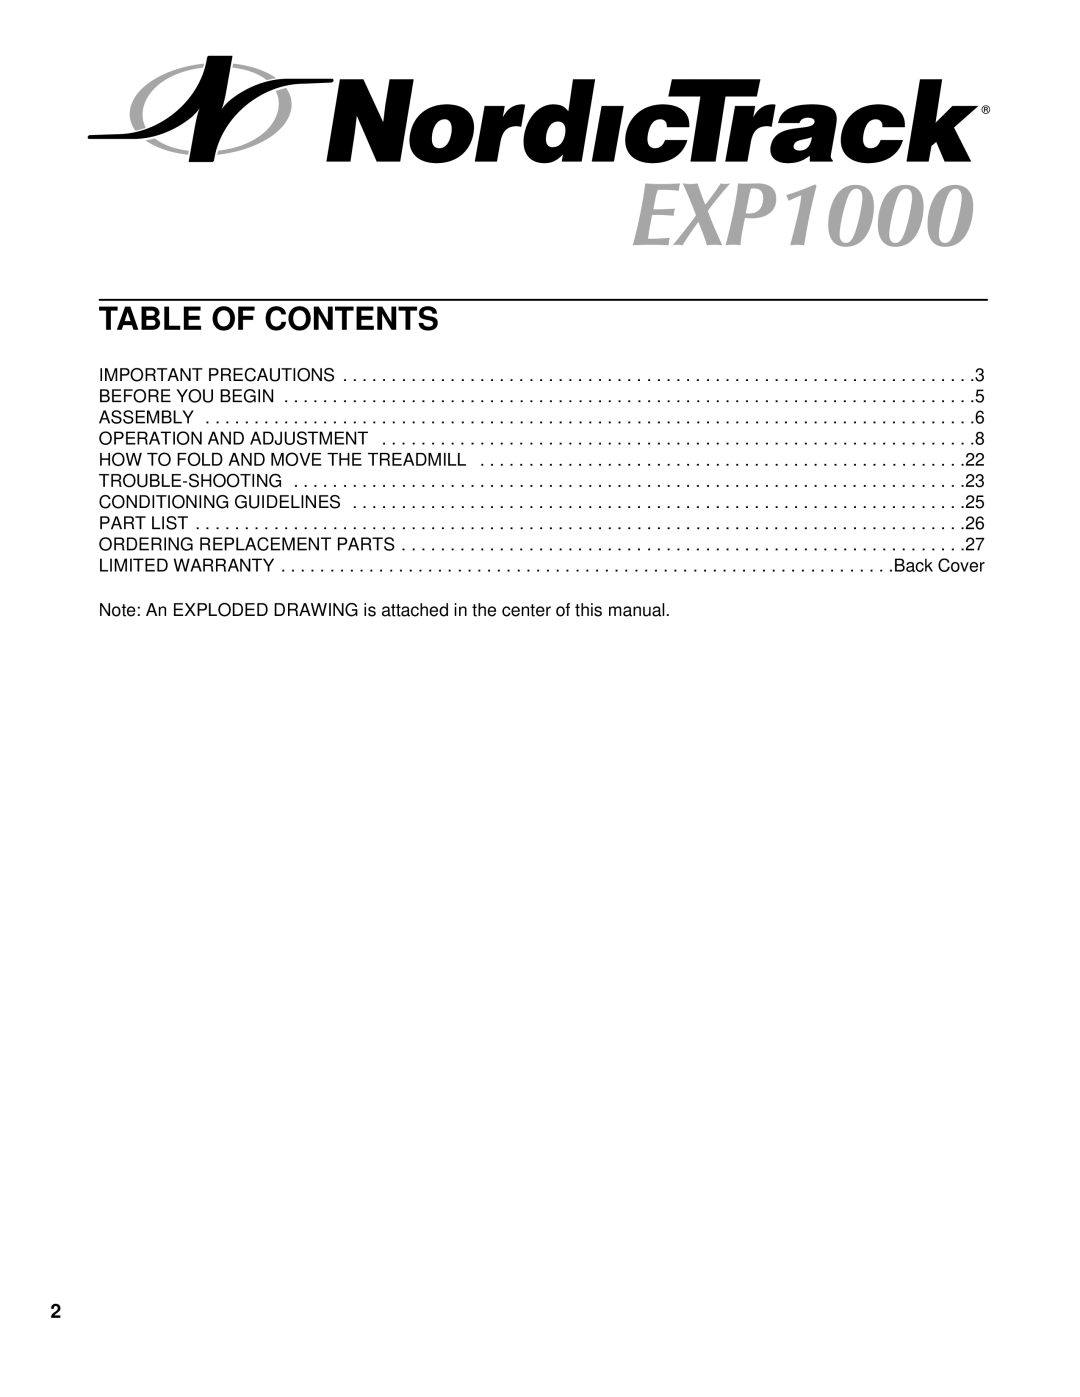 NordicTrack NTTL09994 user manual Table Of Contents, Note An EXPLODED DRAWING is attached in the center of this manual 